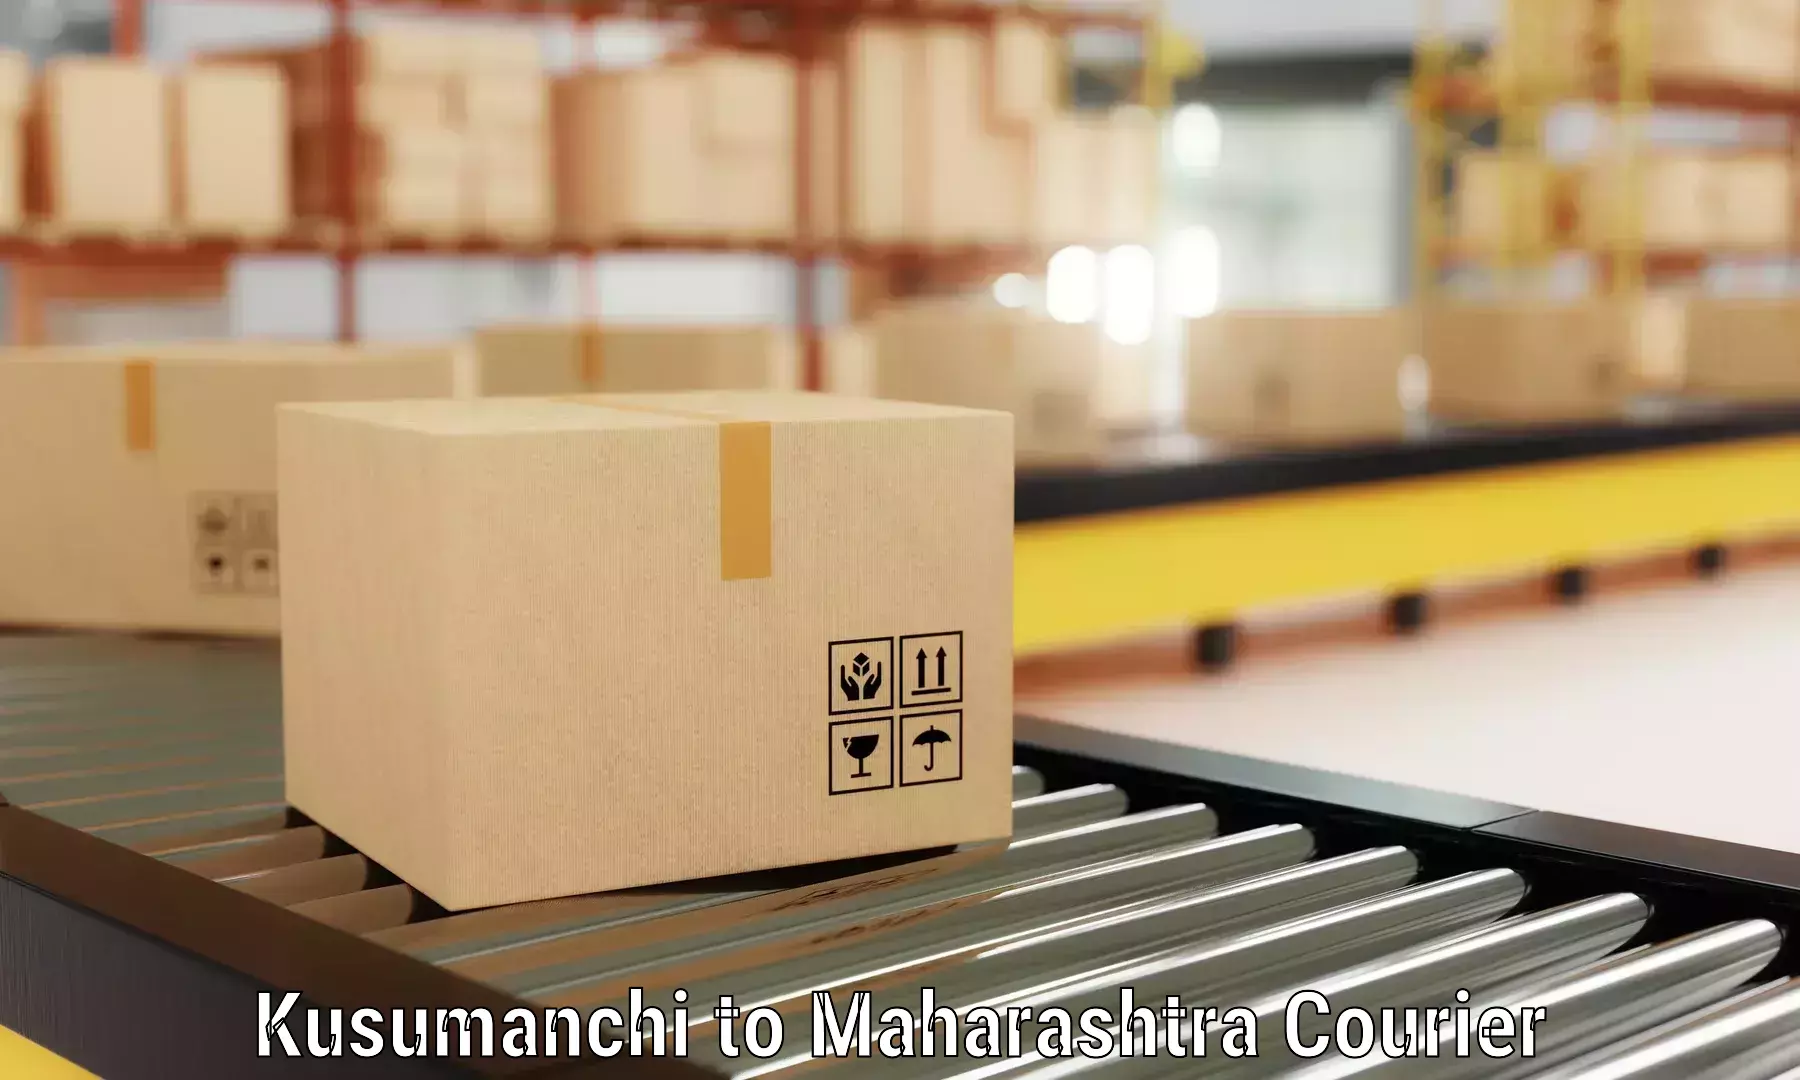 Advanced relocation solutions in Kusumanchi to Mahabaleshwar